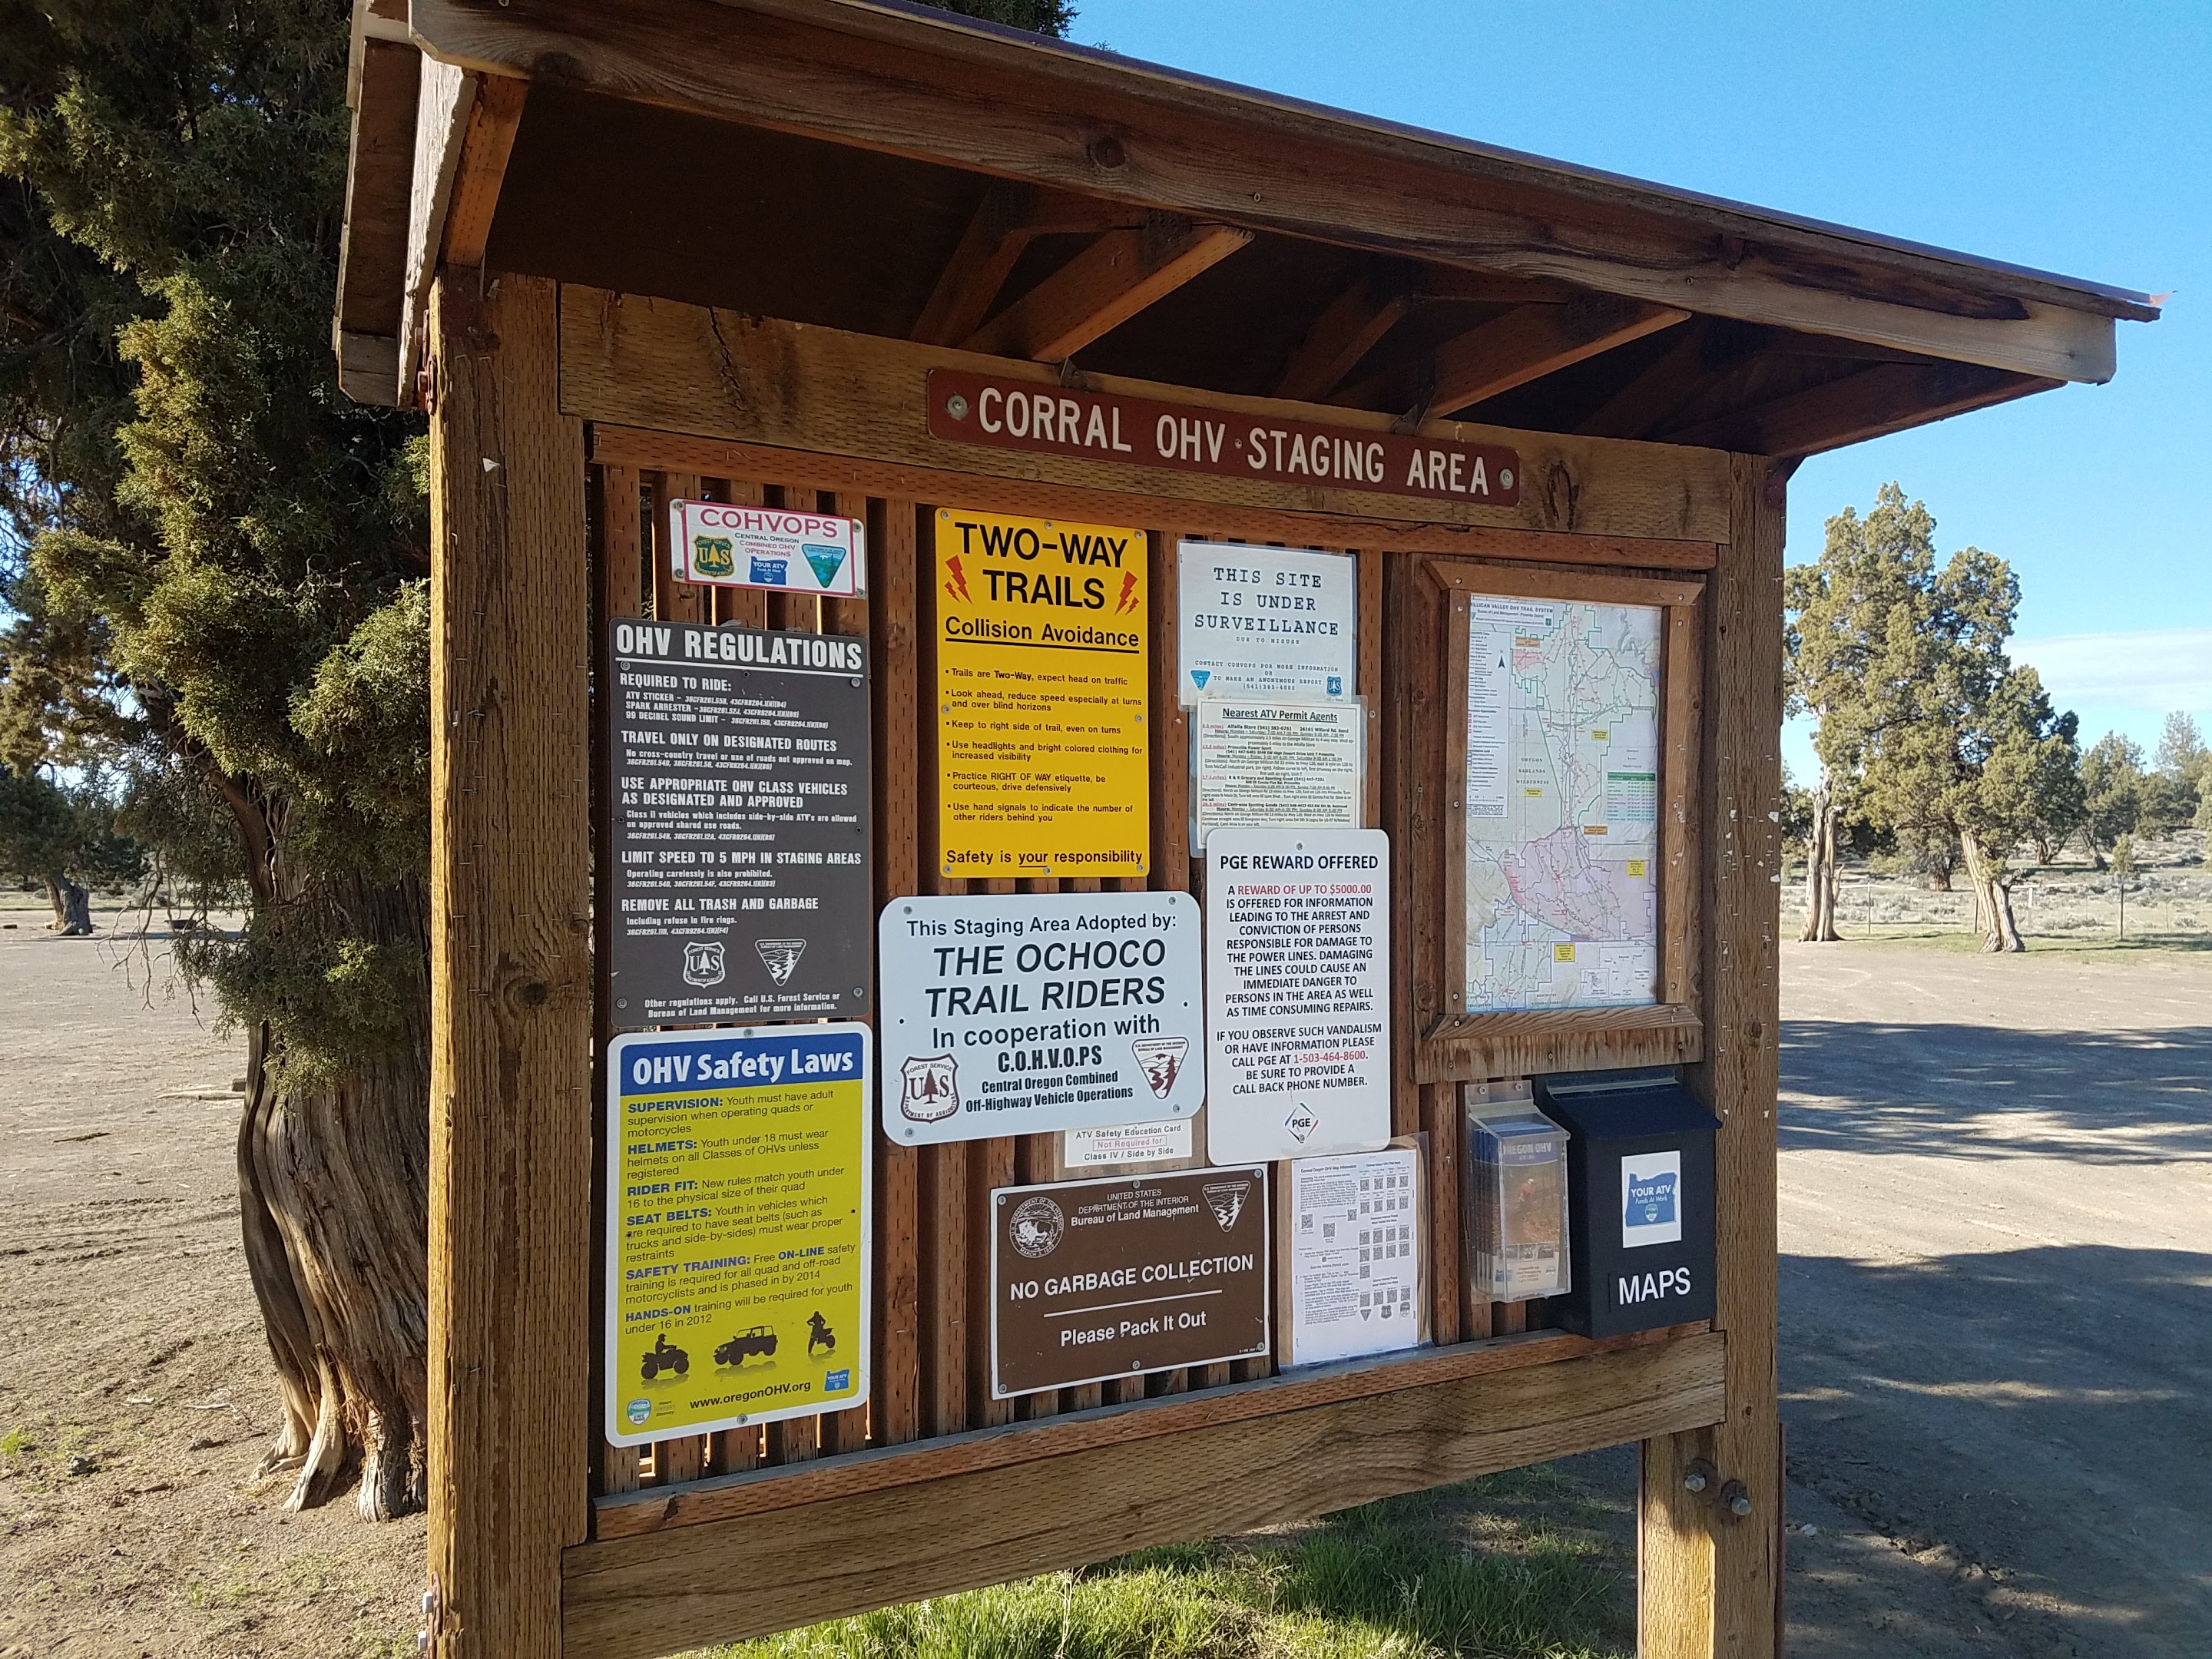 Information kiosk at Corral Off Highway Vehicle Staging Area